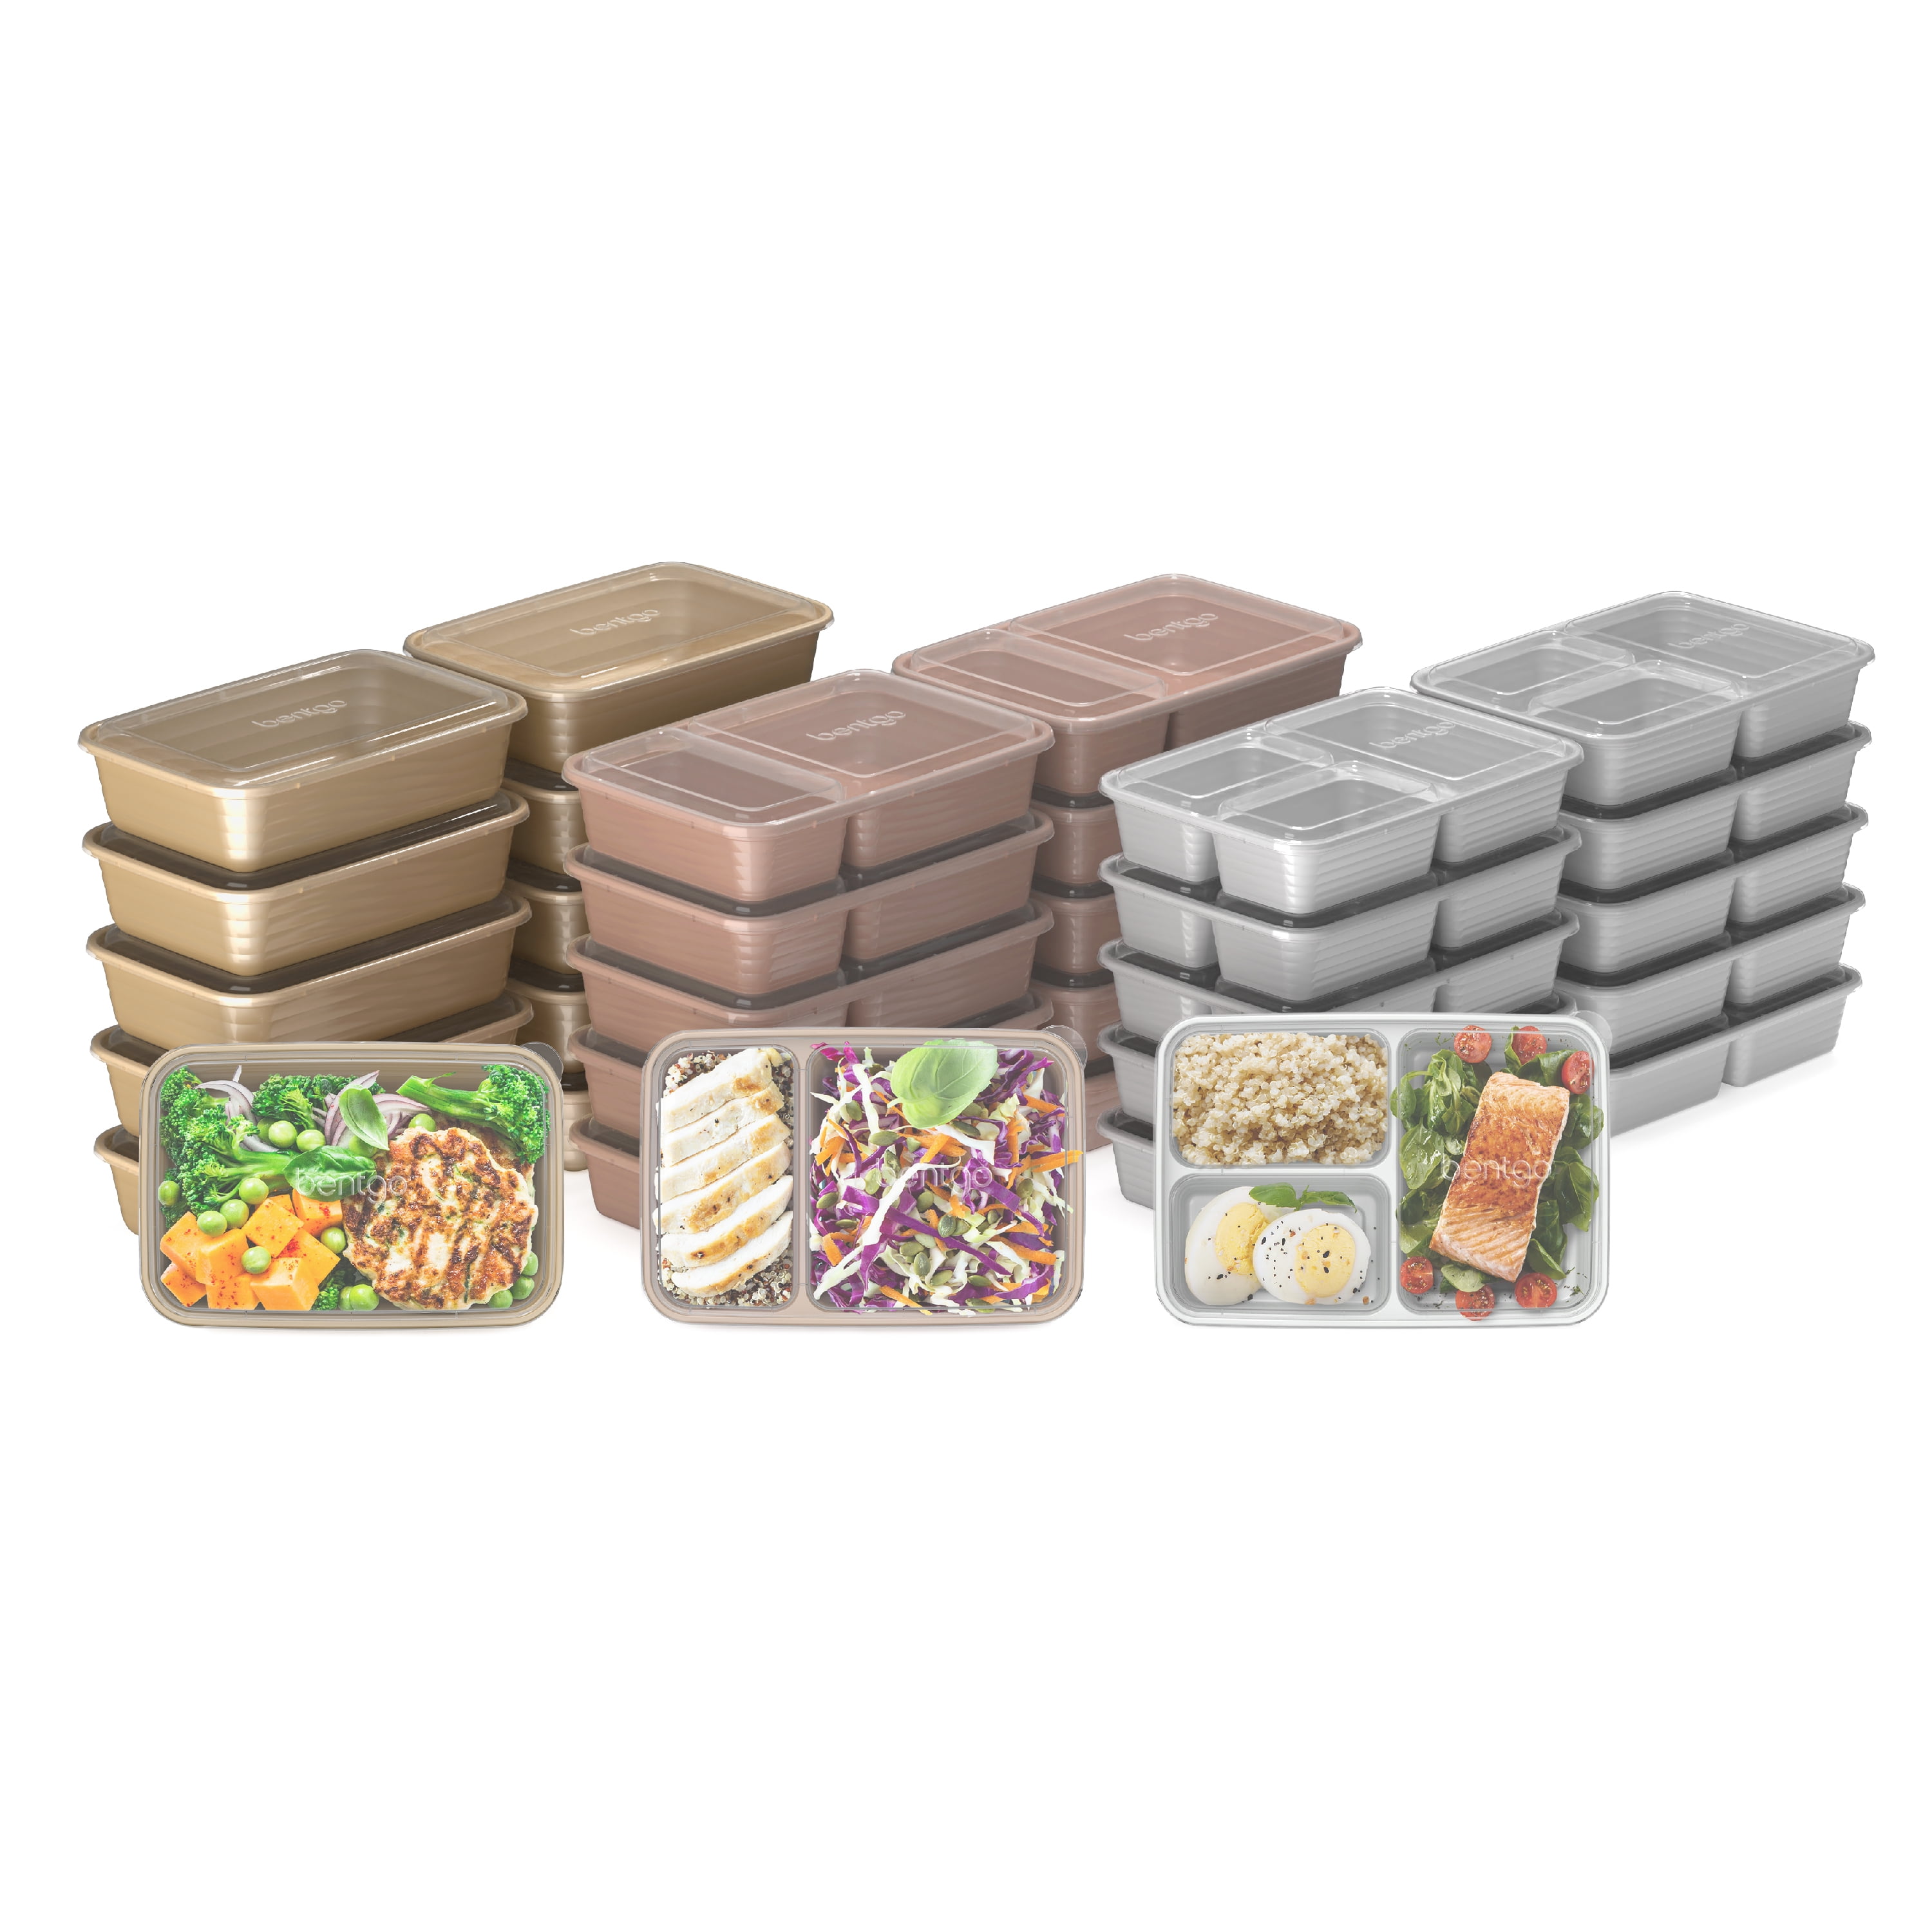 Bentgo® Prep 3-Compartment Containers - 20-Piece Meal Prep Kit with 10  Trays & 10 Custom-Fit Lids - Durable Microwave, Freezer, Dishwasher Safe